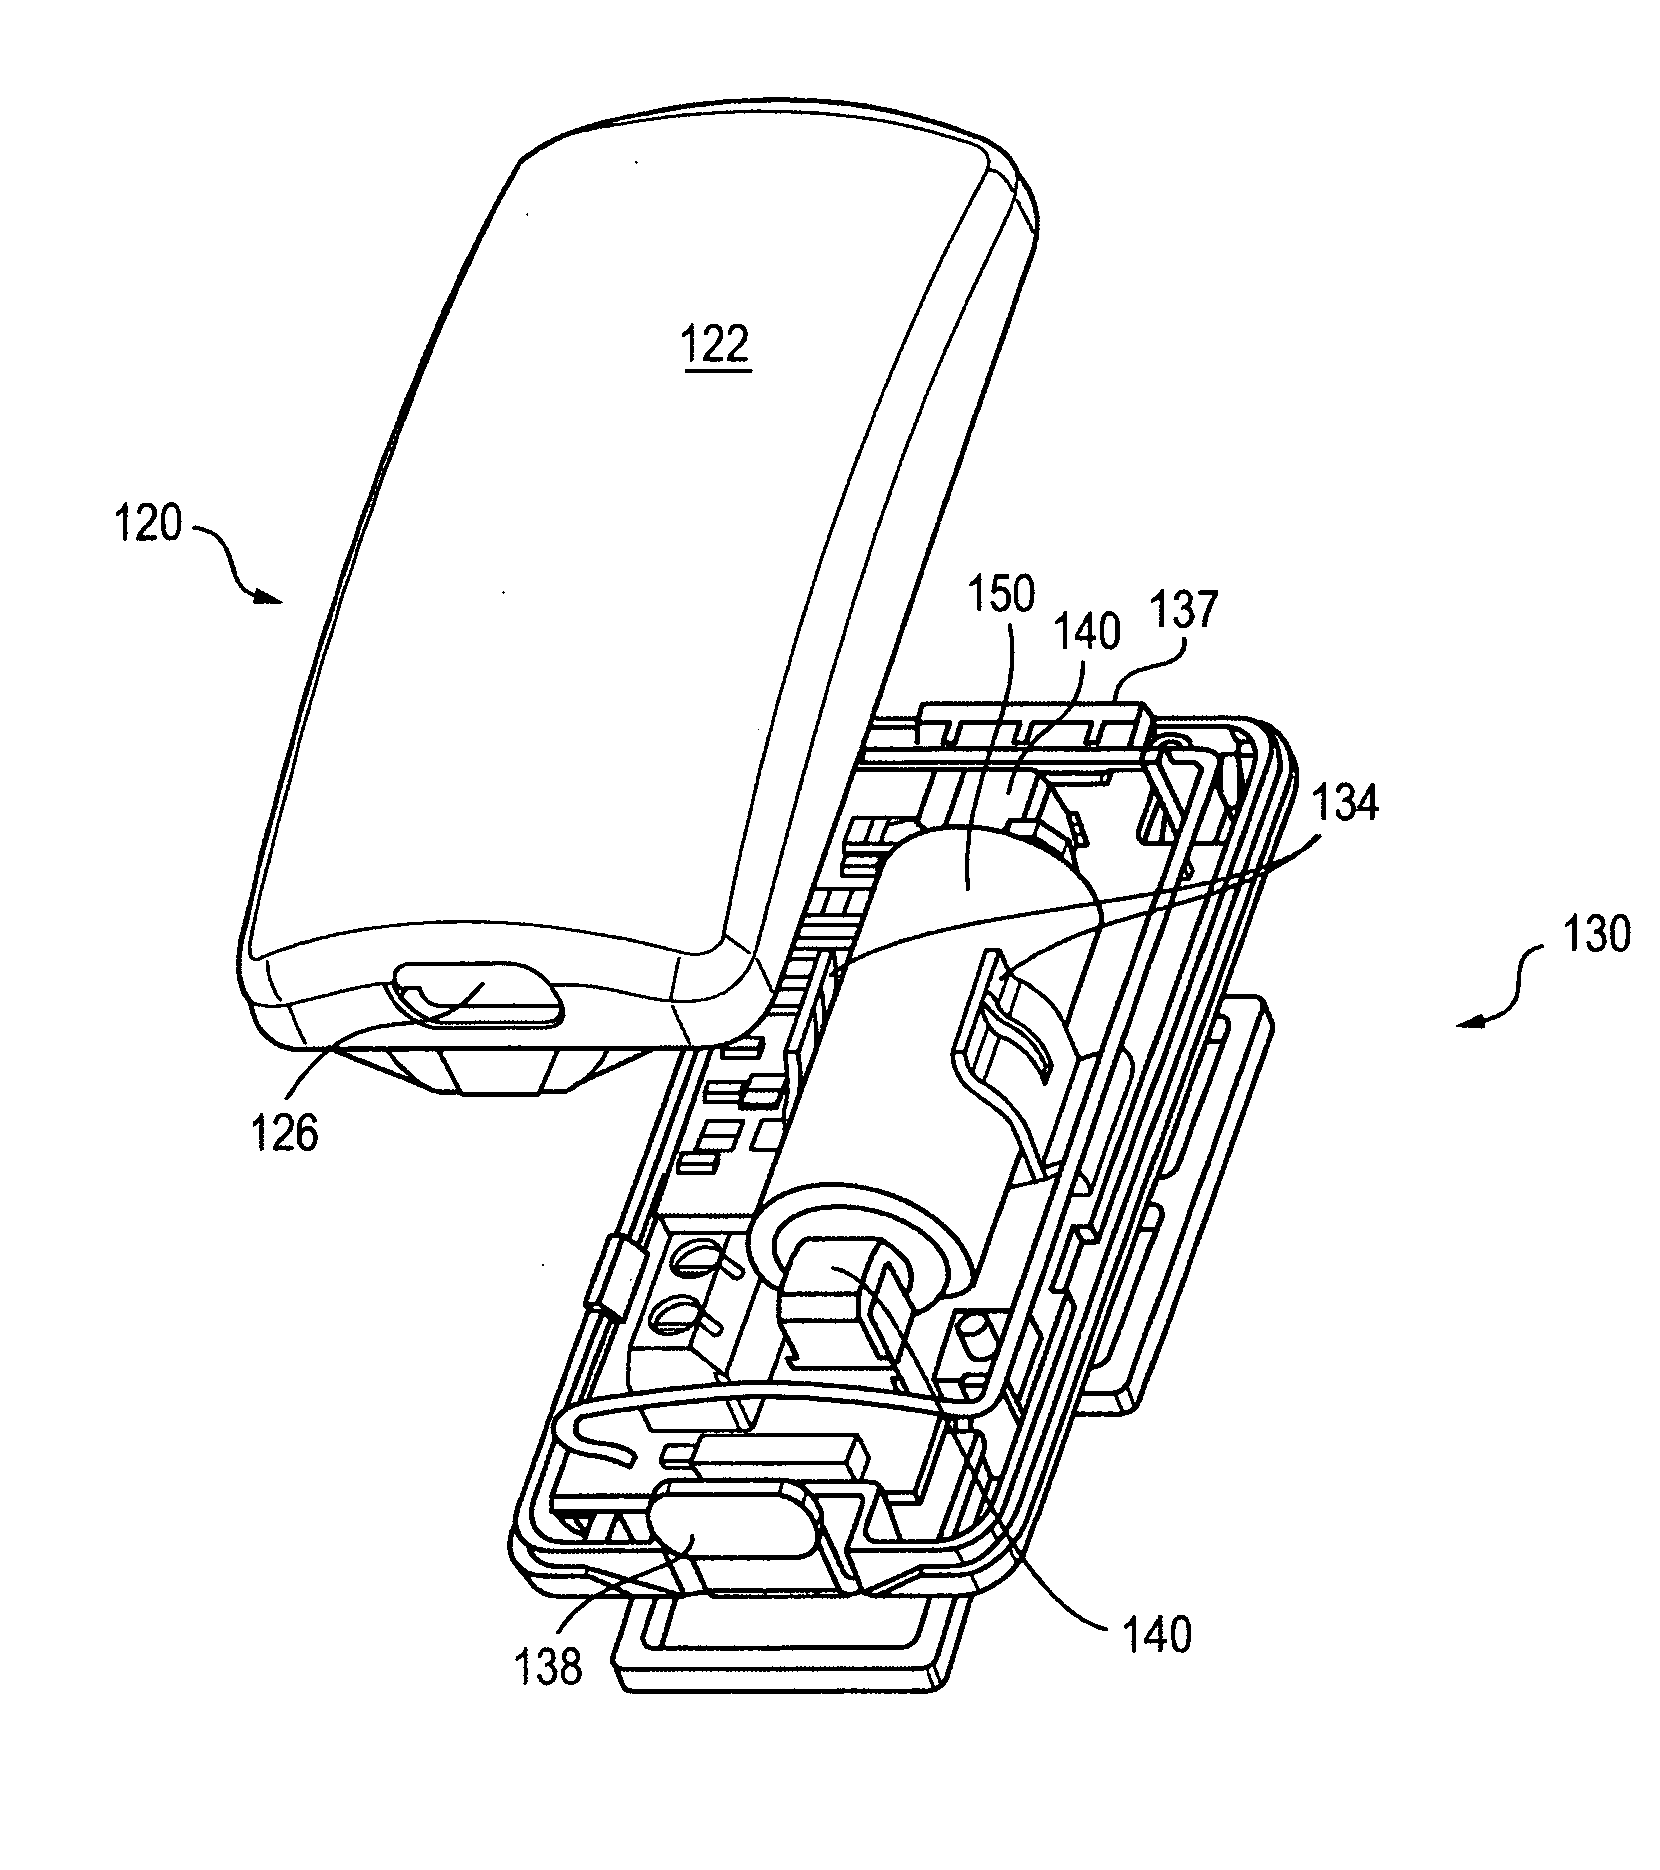 Impact resistant battery housing with cover